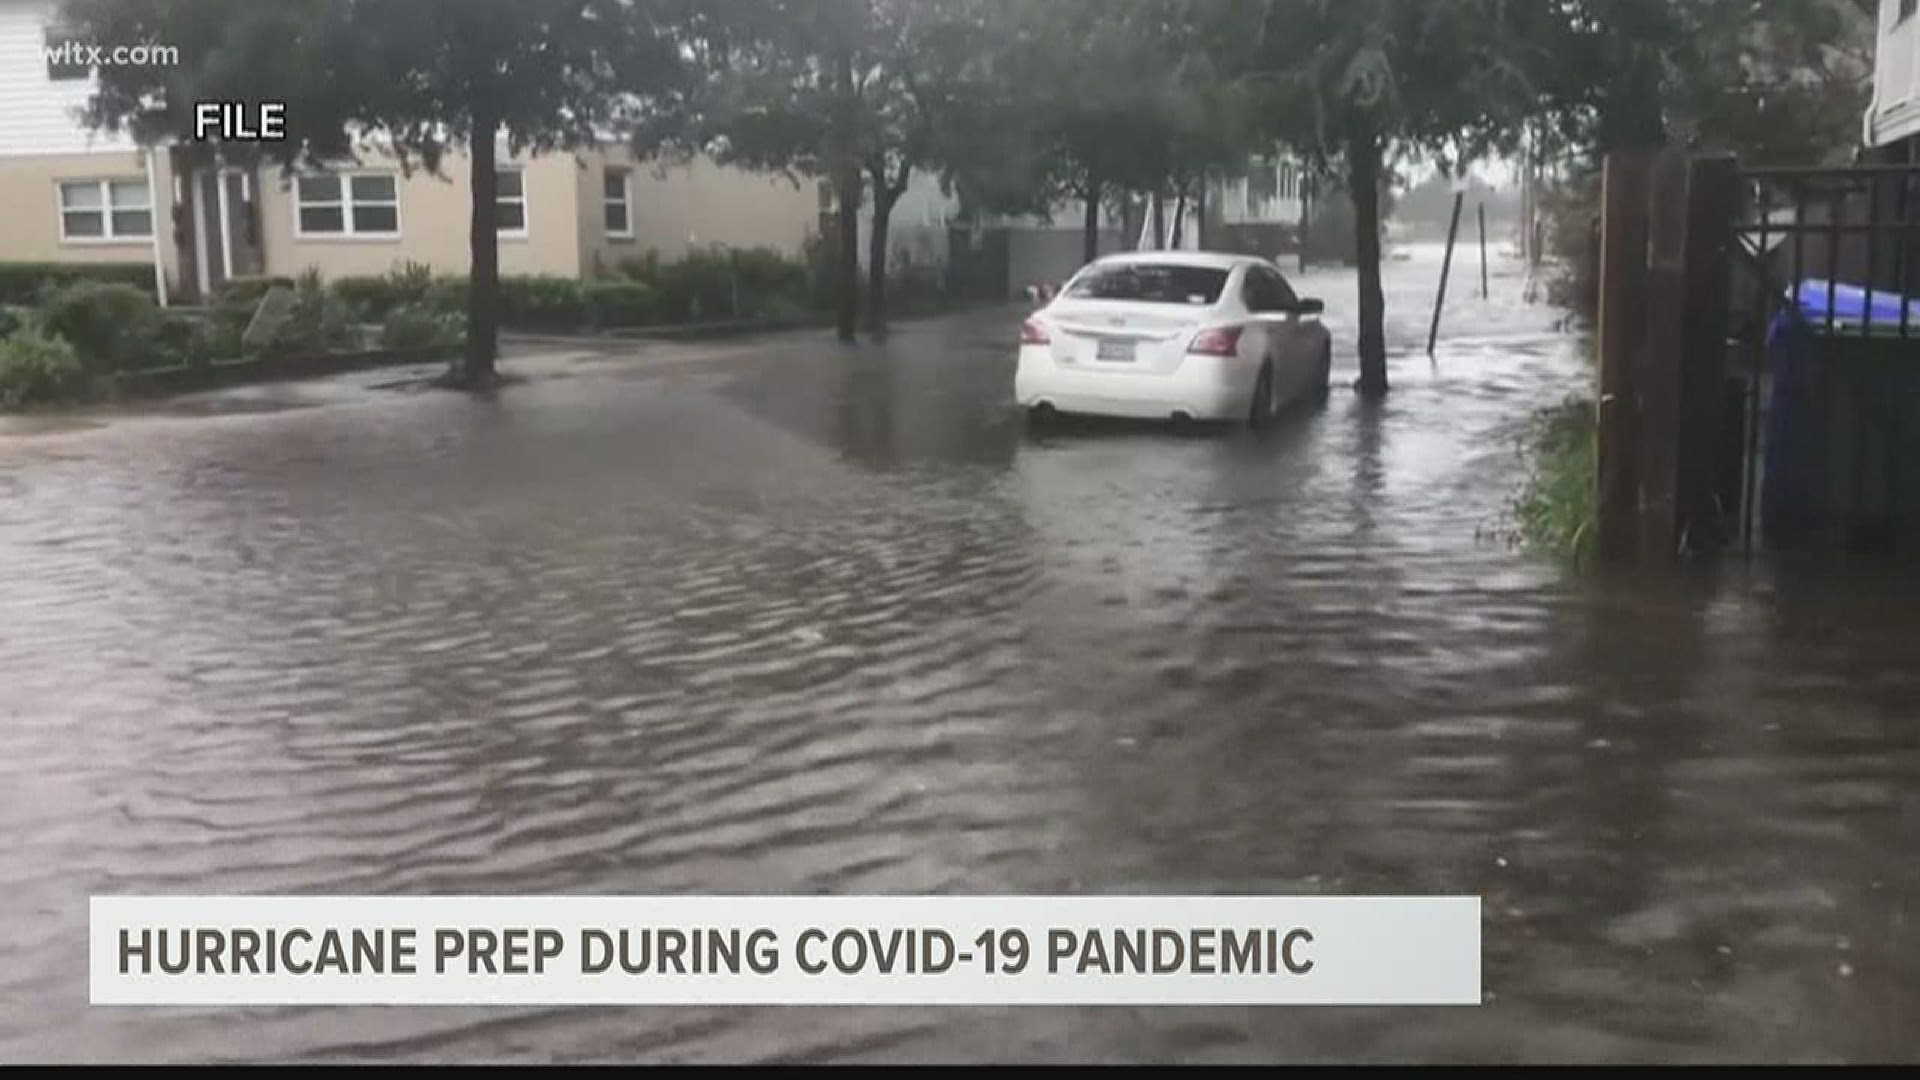 We spoke with the South Carolina Emergency Management Division about the one thing to keep in mind when preparing for hurricanes during the COVID-19 pandemic.